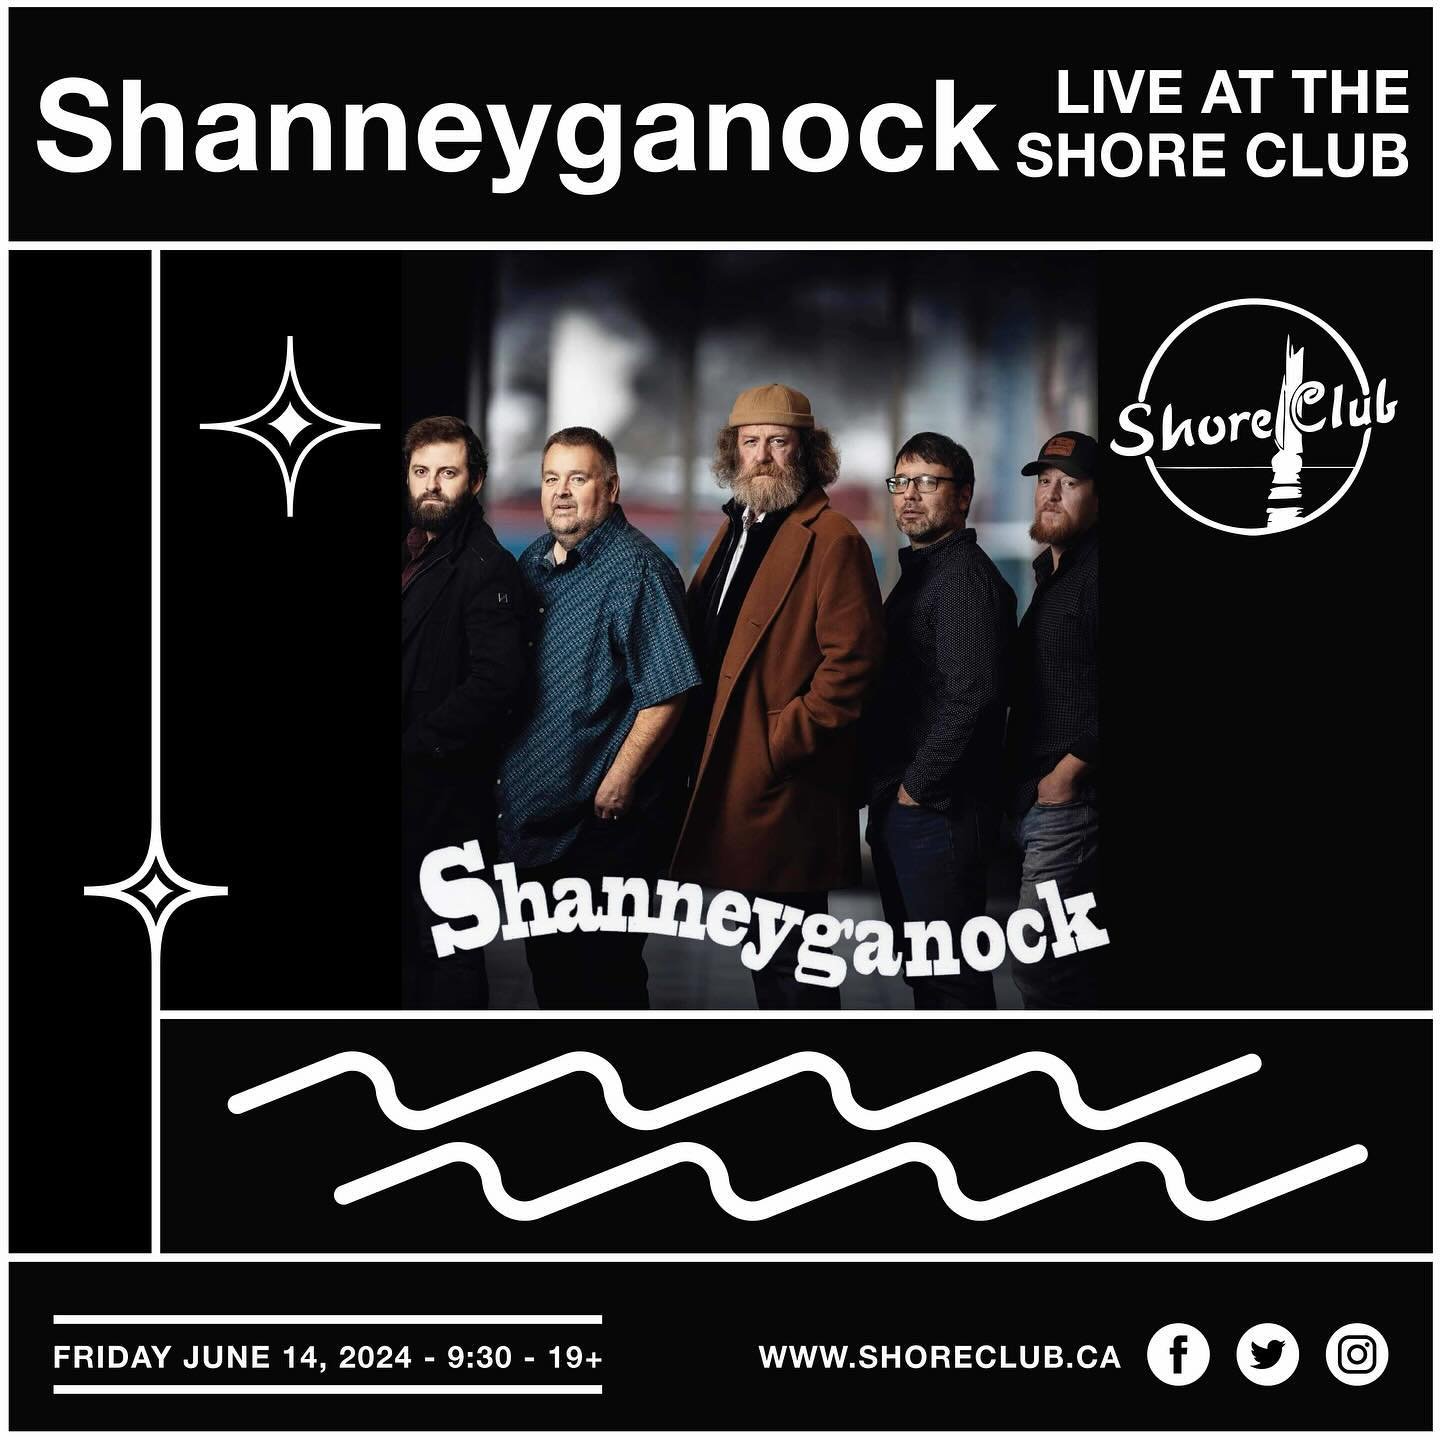 Buds tell your b&rsquo;ys! Shanneyganock is back to knock your socks off! We have moved them to June to (hopefully) avoid another hurricane! 
Catch the Newfoundland legends live on stage Friday June 14, 9:30, 19+
.
Tickets on sale April 12 at 10am At